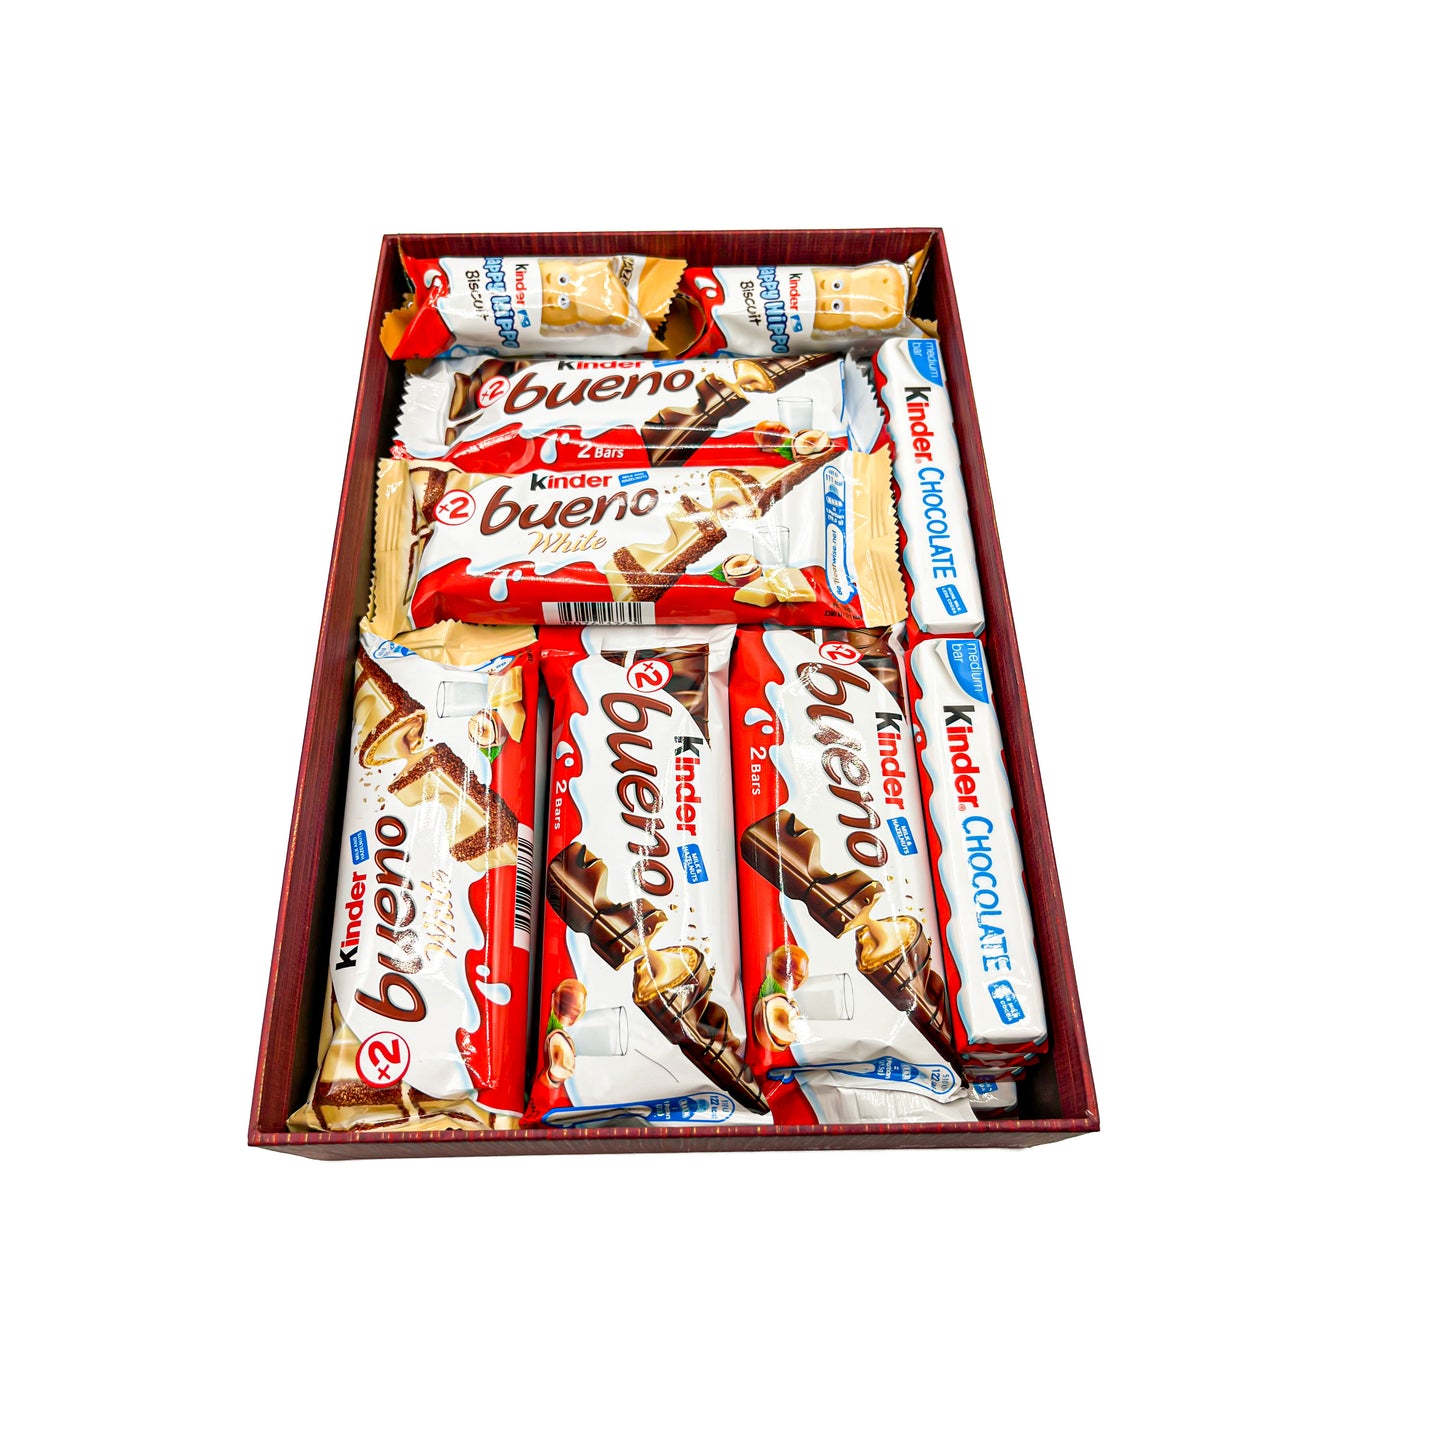 Kinder Bueno Chocolate Box Gift for All Occasions Celebration Gift Hamper - 24 Chocolates